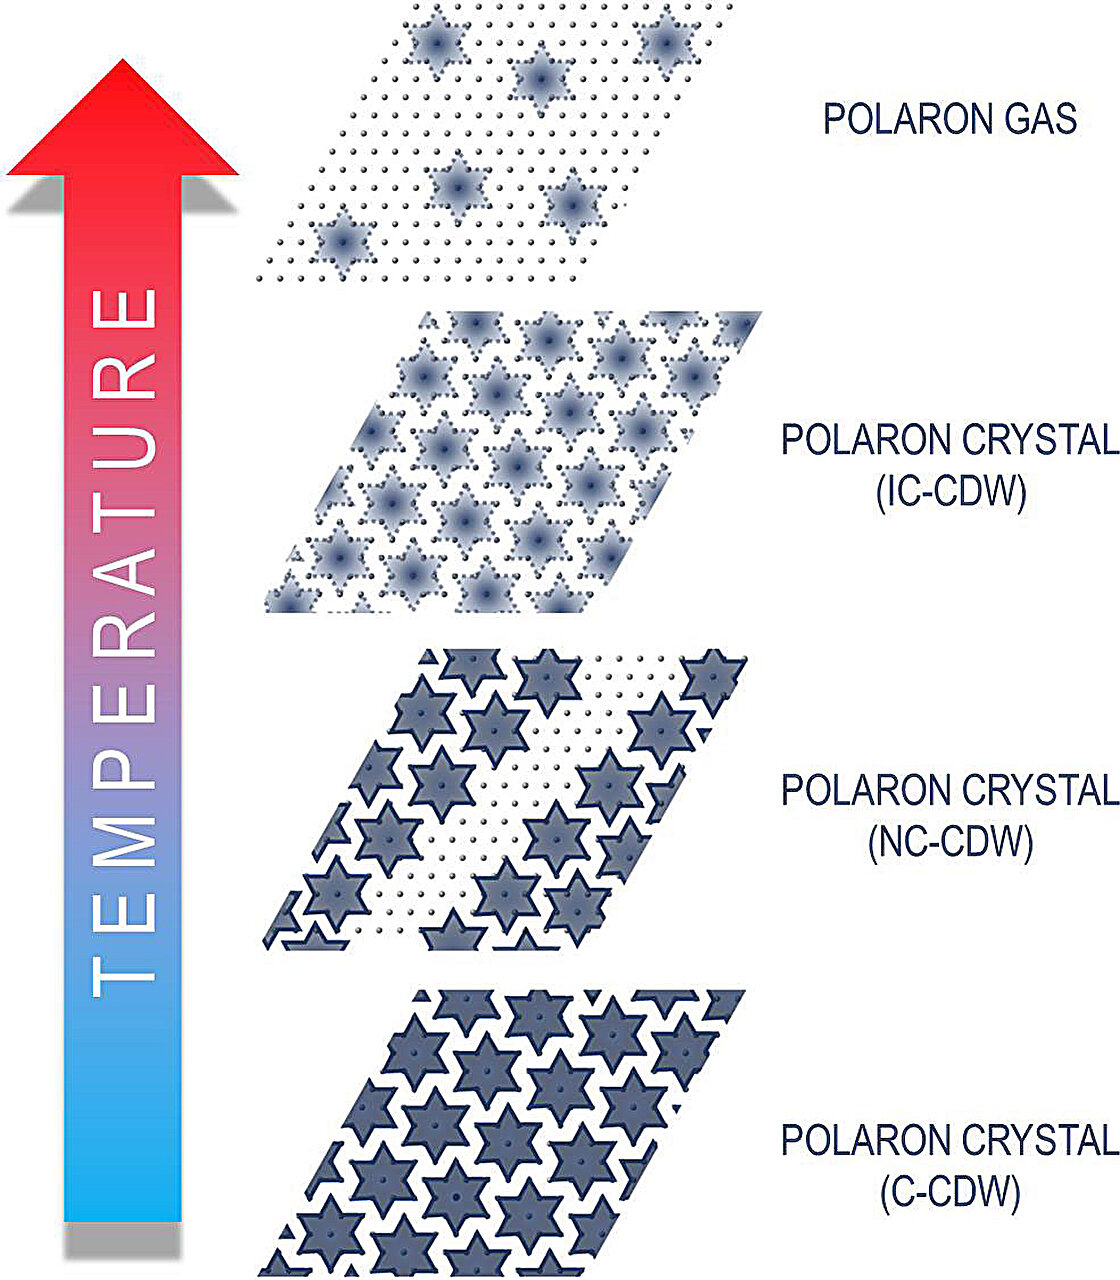 Evolution with temperature of polarons in tantalum layers of 1T-TaS2 through different CDW phases: commensurate (C), nearly commensurate (NC), and incommensurate (IC). When CDW is removed at high temperature, polarons are in a gas-like state. Credit: Nature Communications (2023). DOI: 10.1038/s41467-023-42631-6